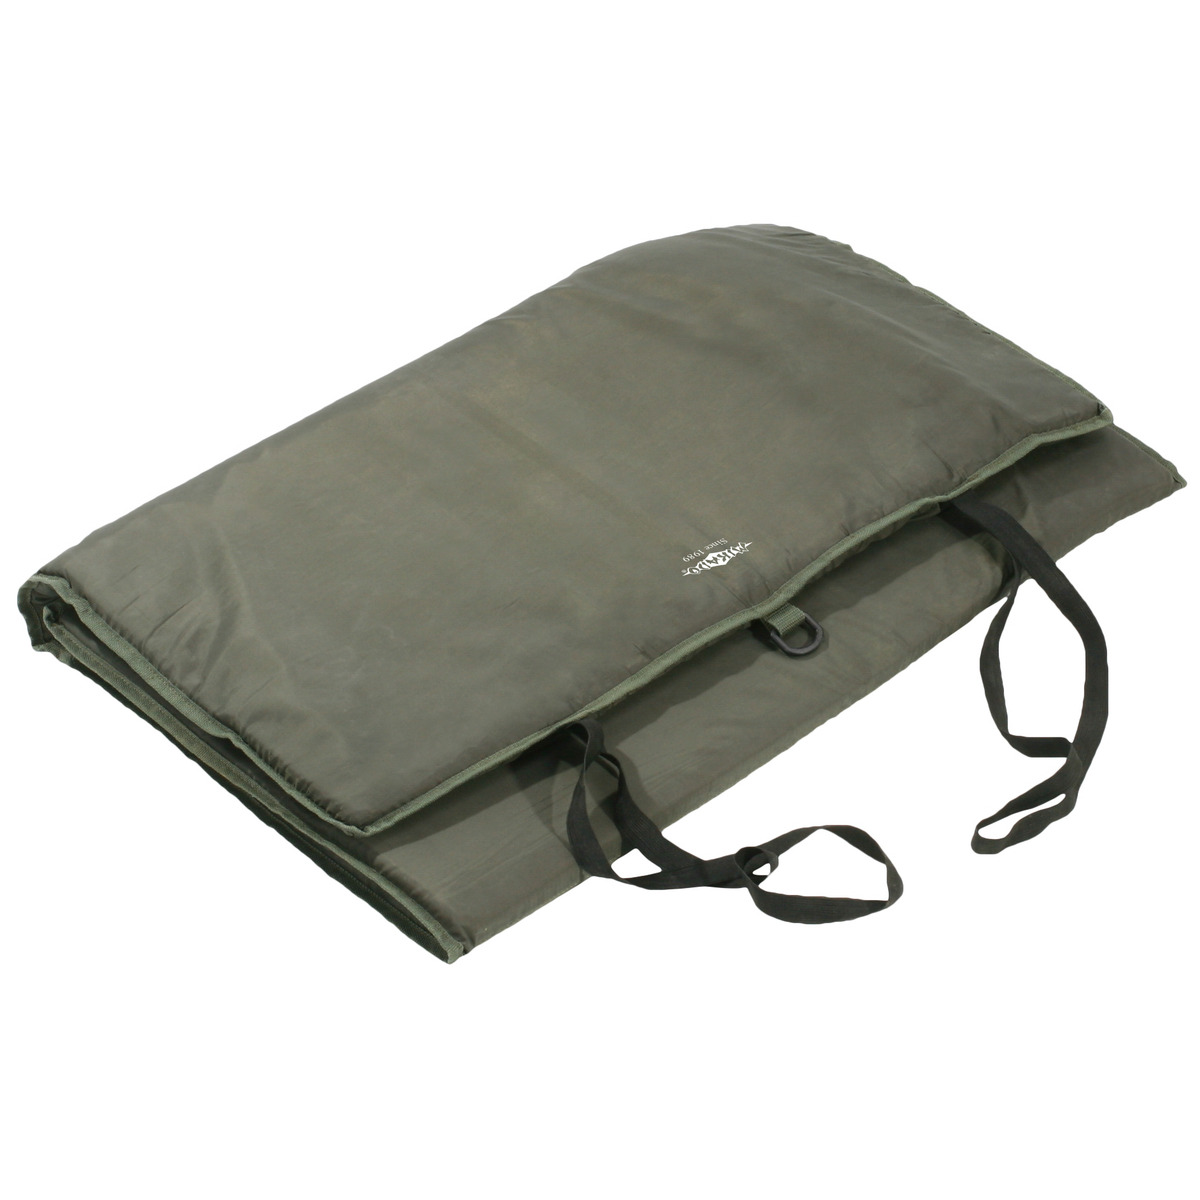 Mikado Mat - FIRST MAT  FOR UNHOOKING AND WEIGHING 127x69 cm